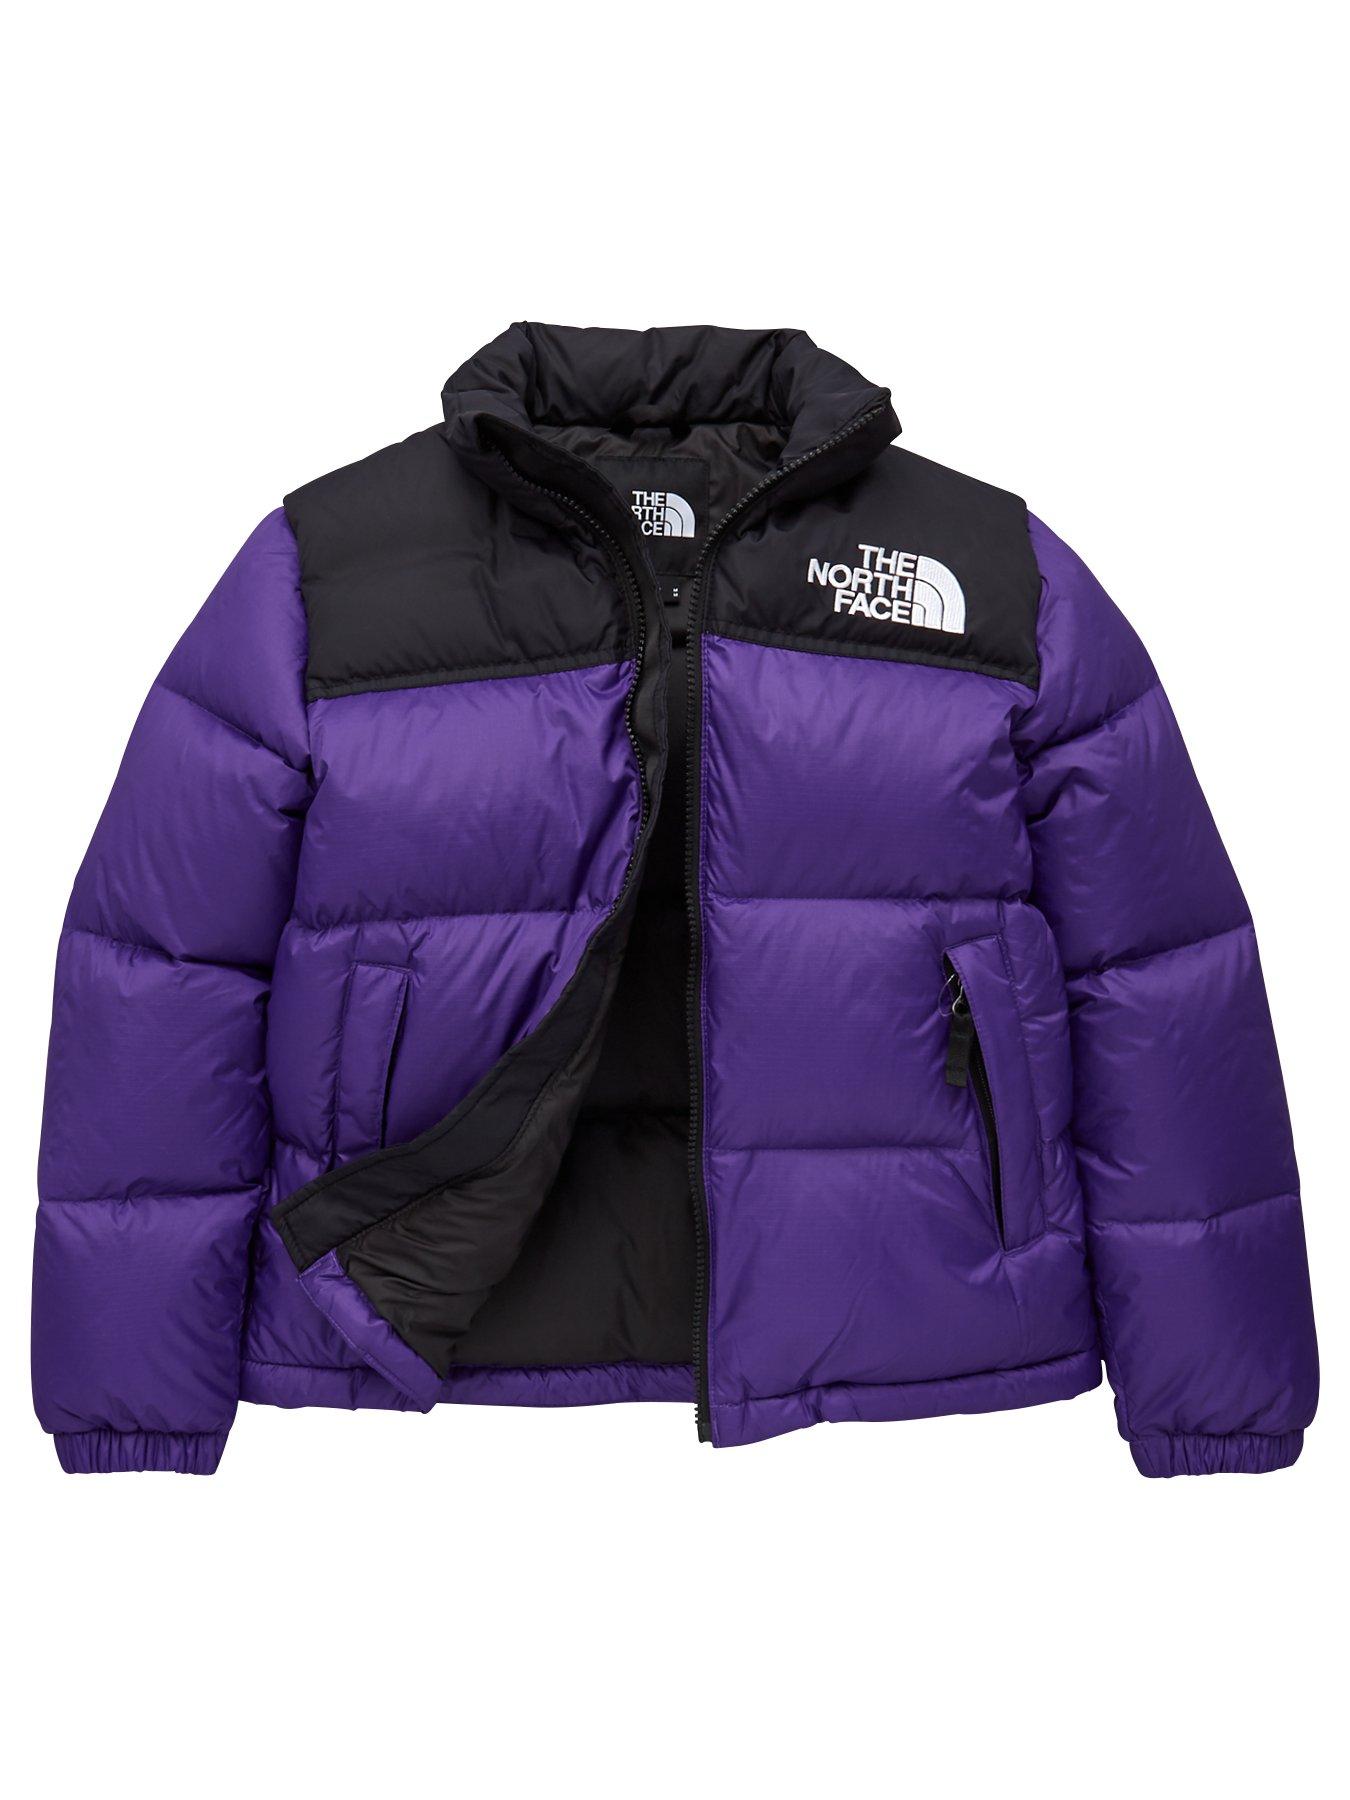 the north face childrens sizes